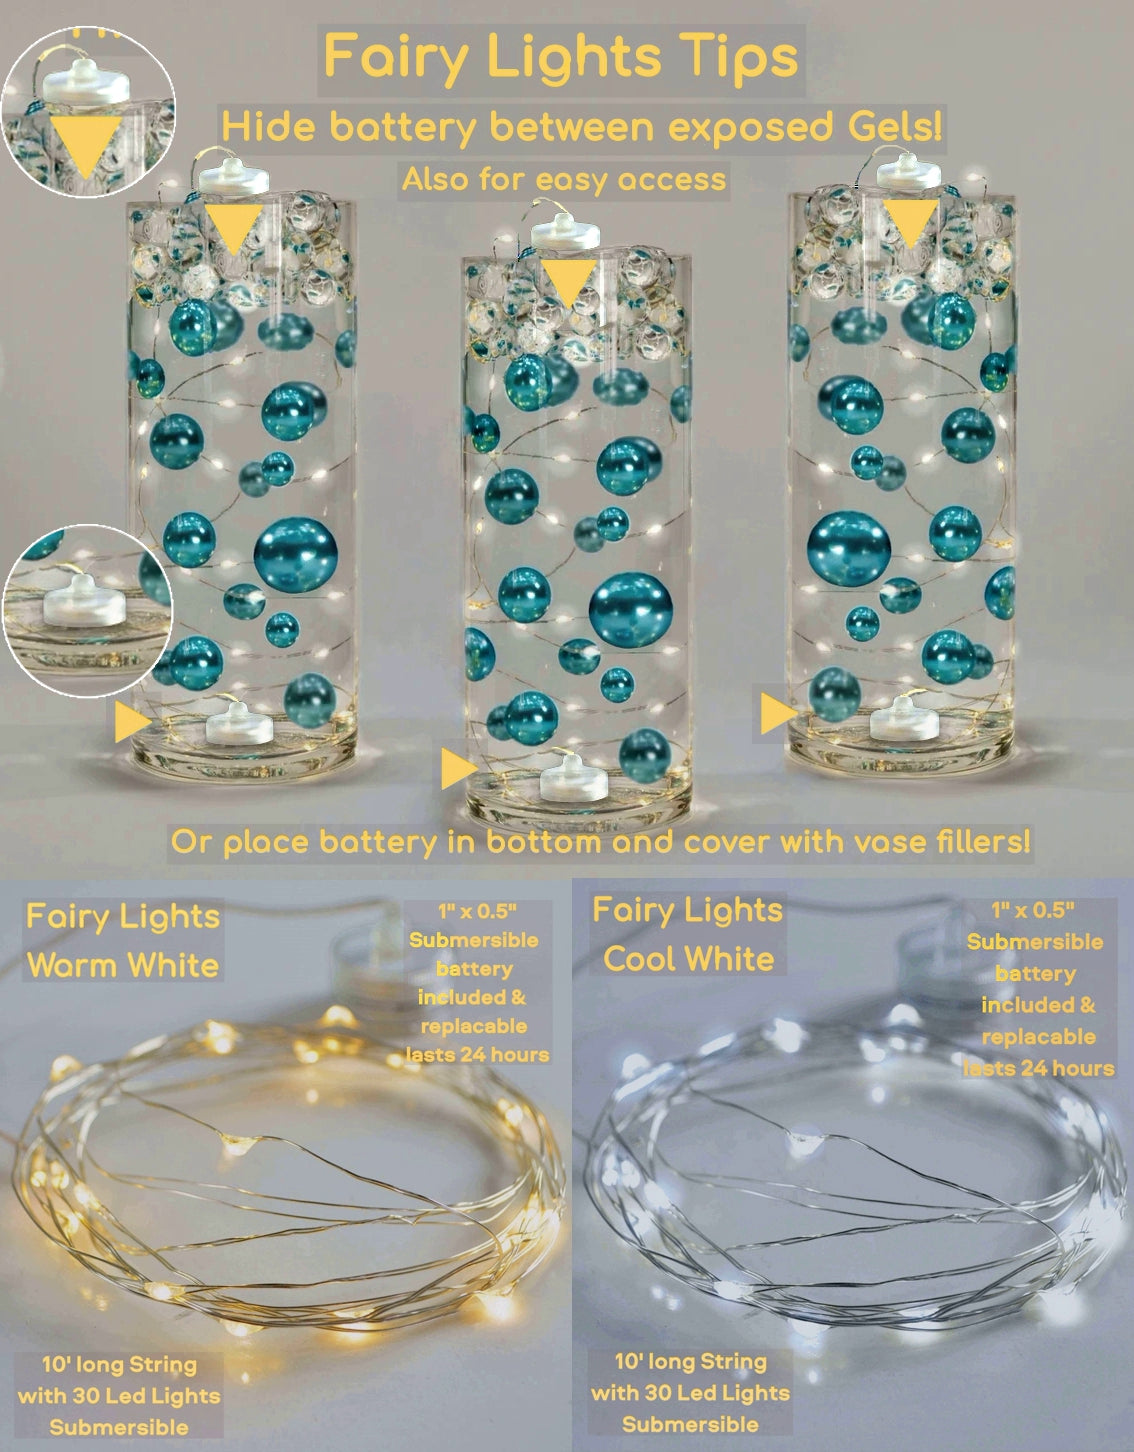 55 Floating Metallic Silver Pearls-No Holes-Fills 1 Gallon of Floating Pearls & Crystal Clear Gels for Floating Effect-With Exclusive Measured Floating Gels Prep Bag- Option: 3 Submersible Fairy Lights Strings